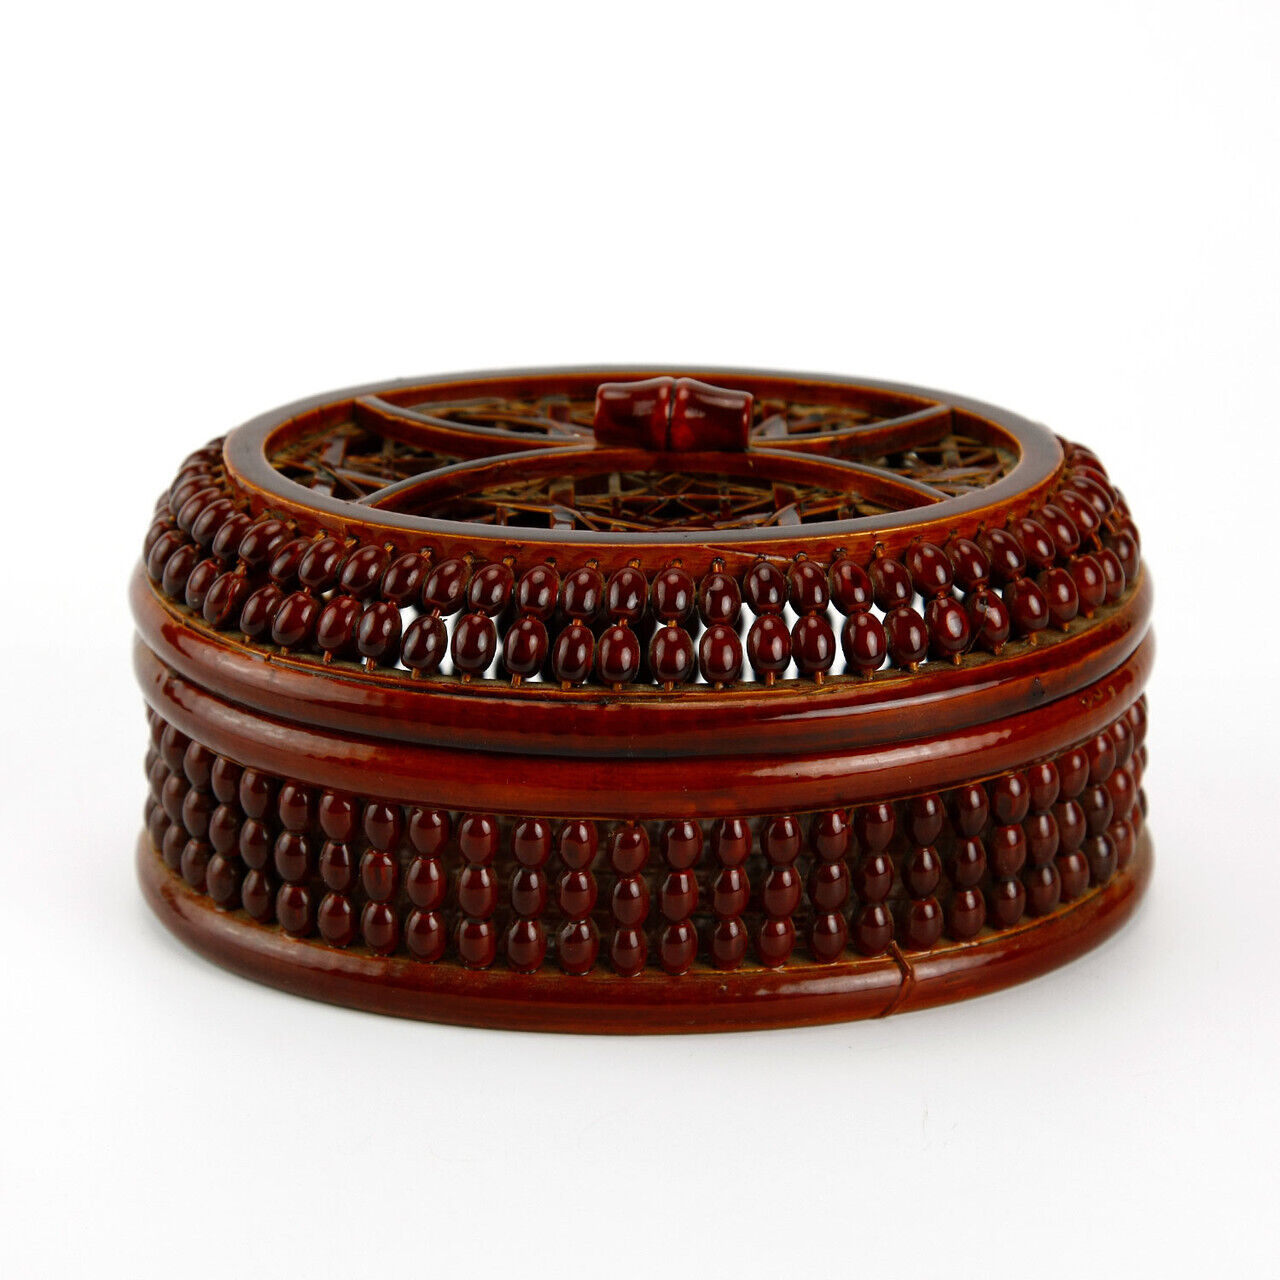 Vintage Handmade Bamboo Weaved Lacquer Trinket Box with Lid